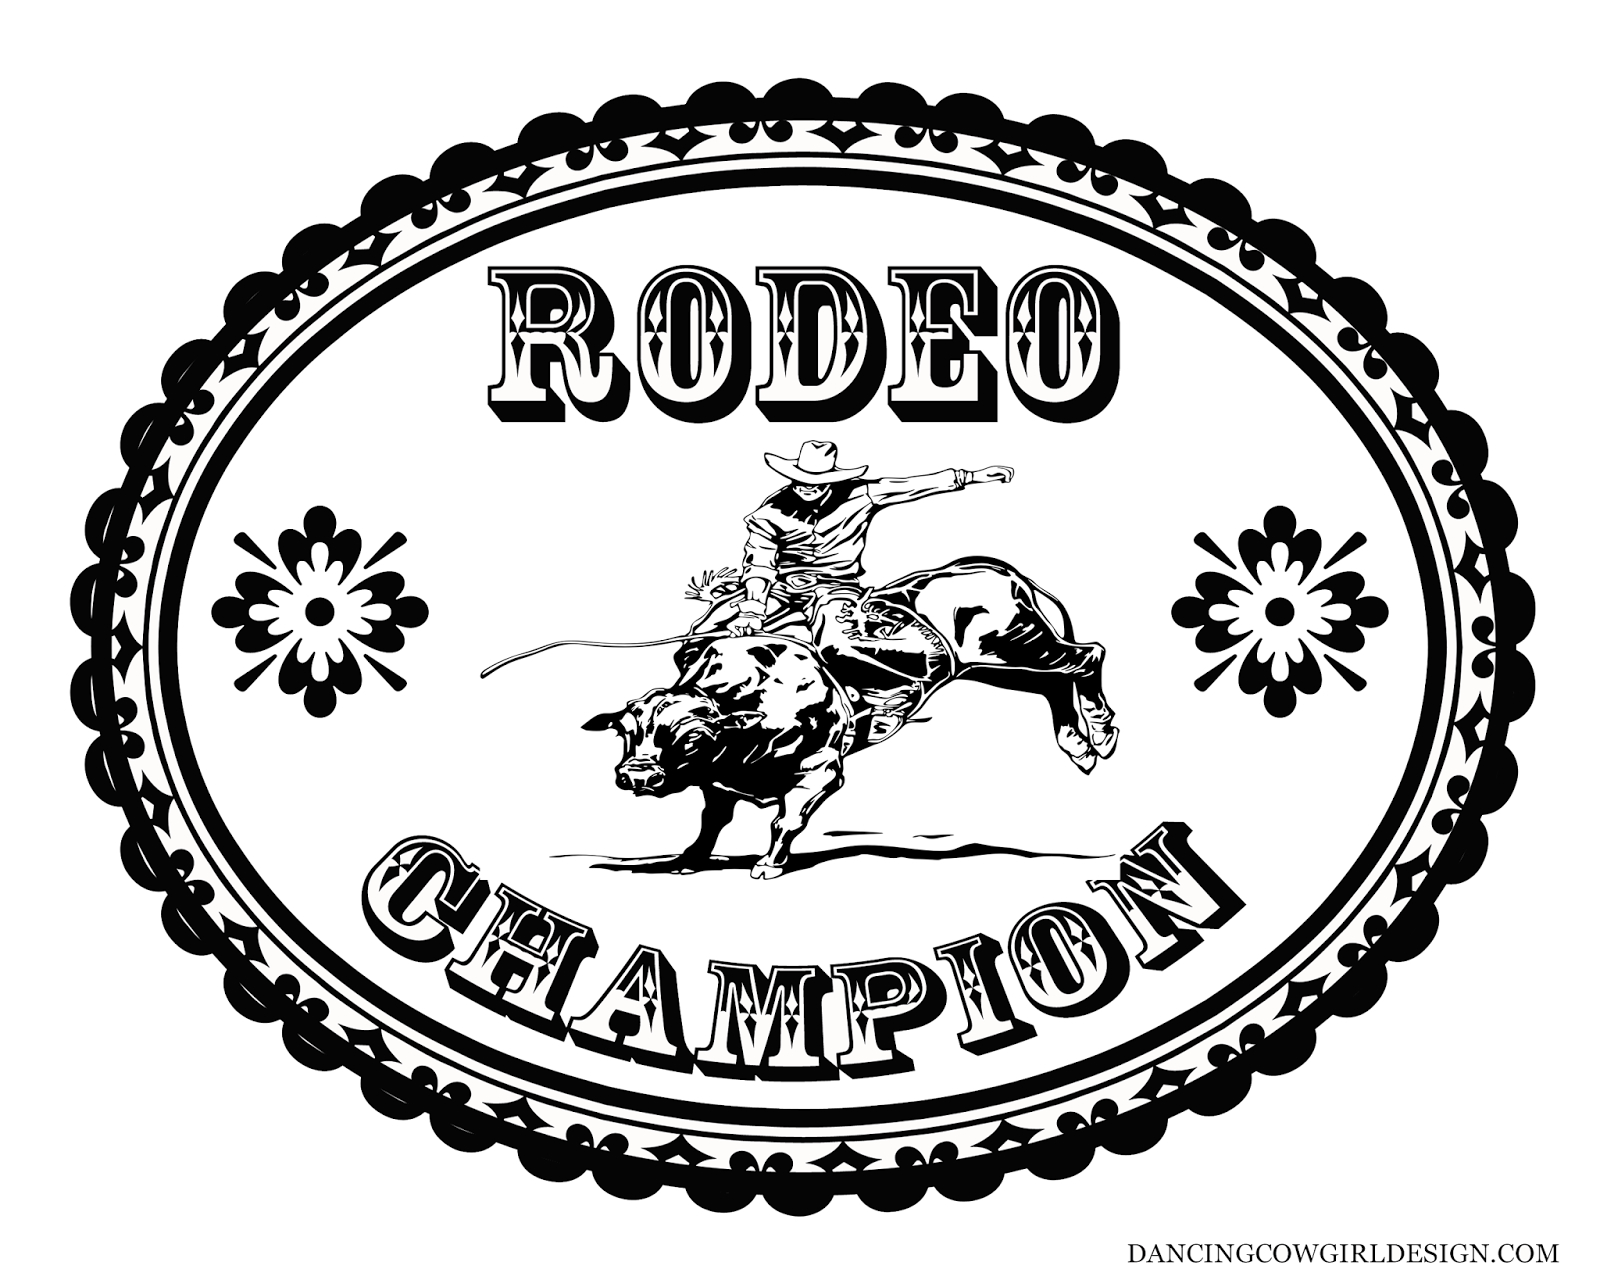 Bull Riding Coloring Pages Rodeo Coloring Pages Coloring Sheet Cowboy Rodeo Bull Rider Belt Buckle